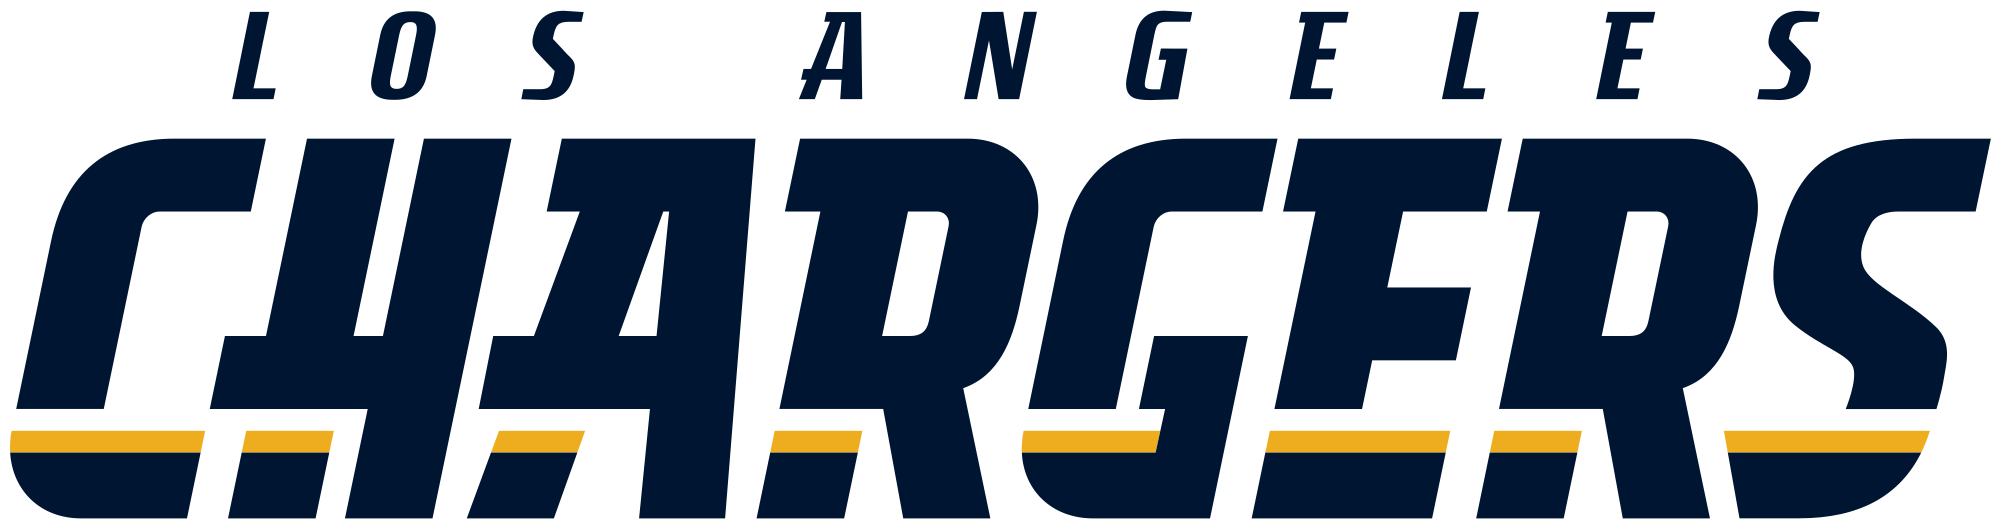 Chargers Logo - File:Los Angeles Chargers wordmark.svg - Wikimedia Commons